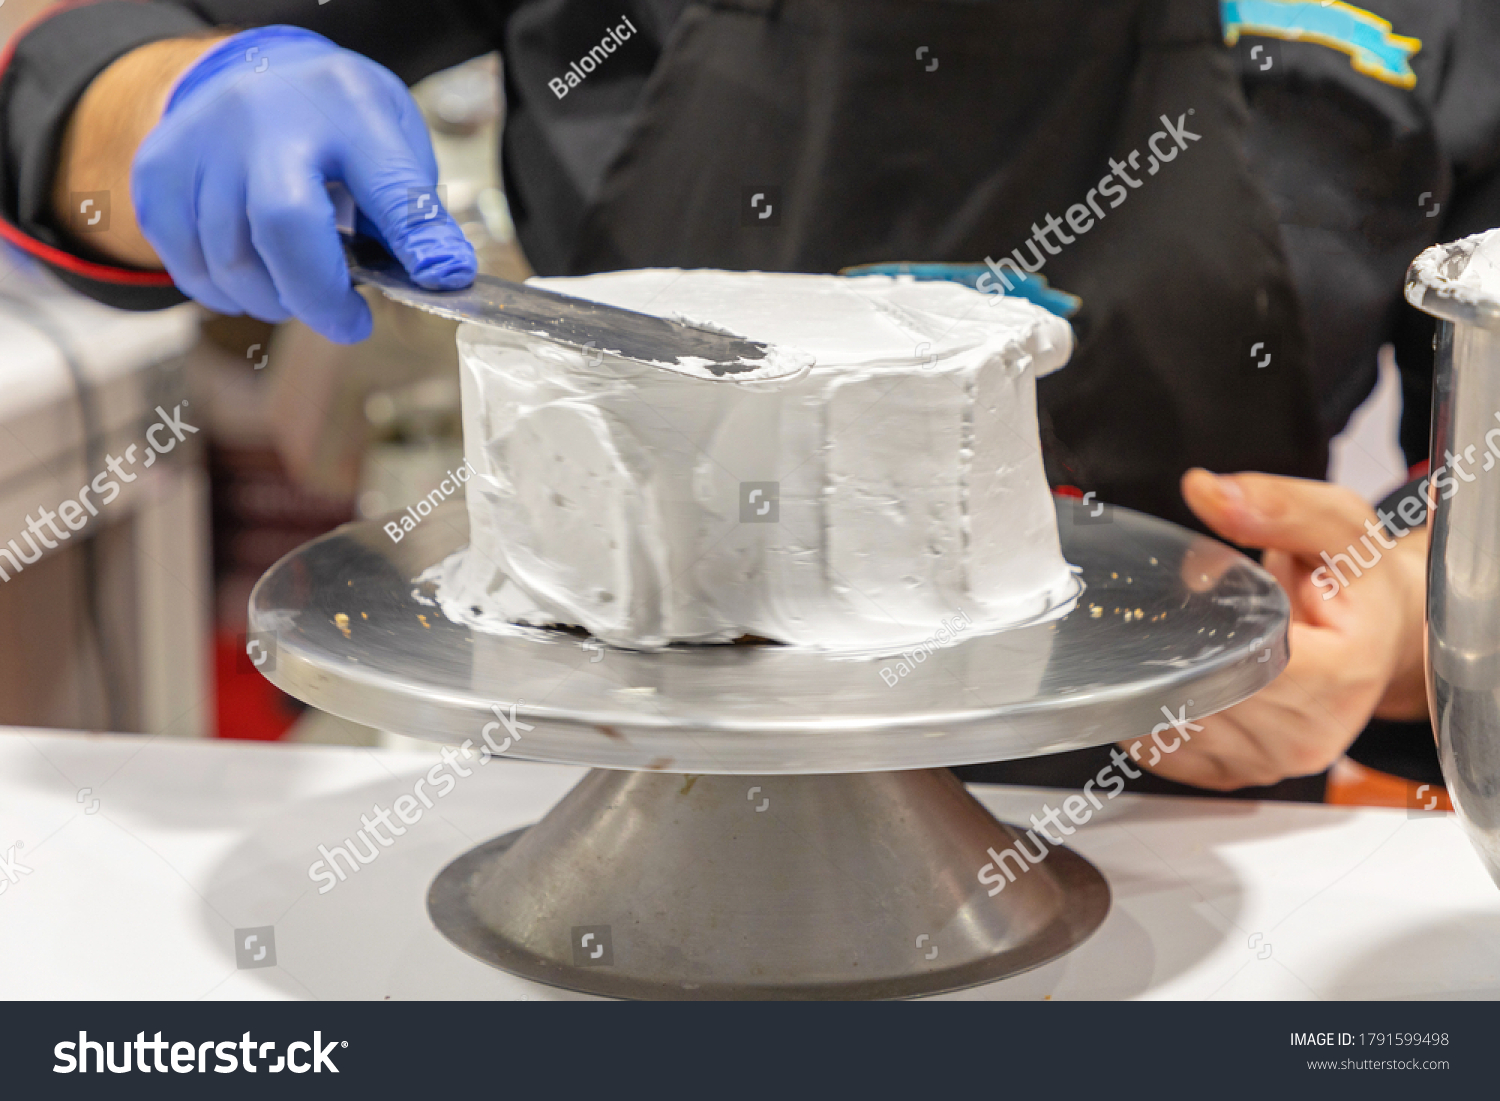 468 Cake Turntable Images, Stock Photos  Vectors  Shutterstock